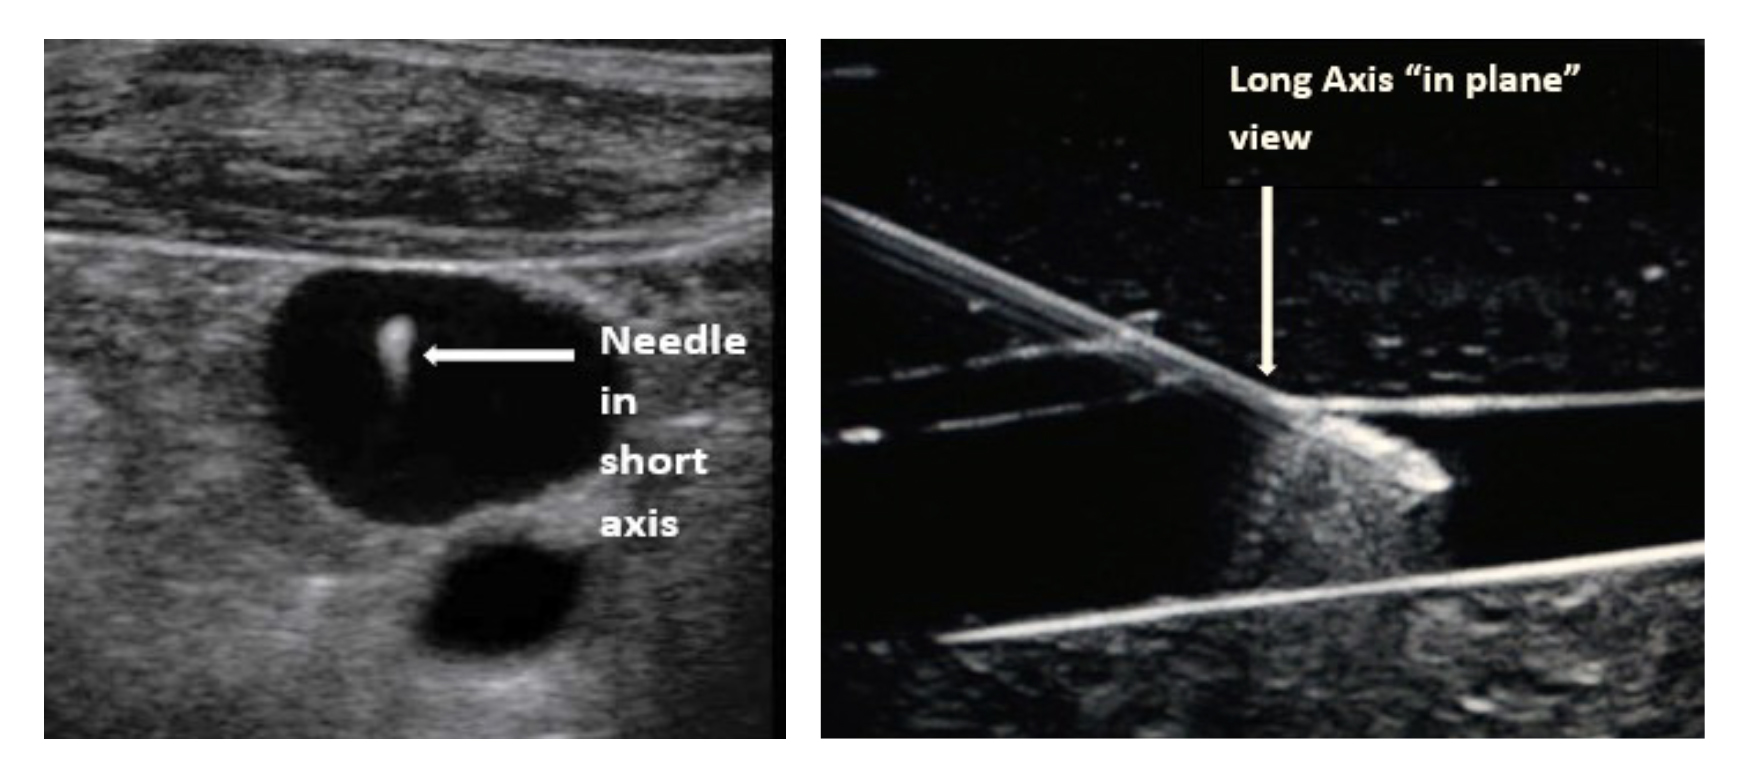 <h1><strong>The benefits of Ultrasound Guidance when used to aid in central venous, peripheral venous, or arterial access.</strong></h1>